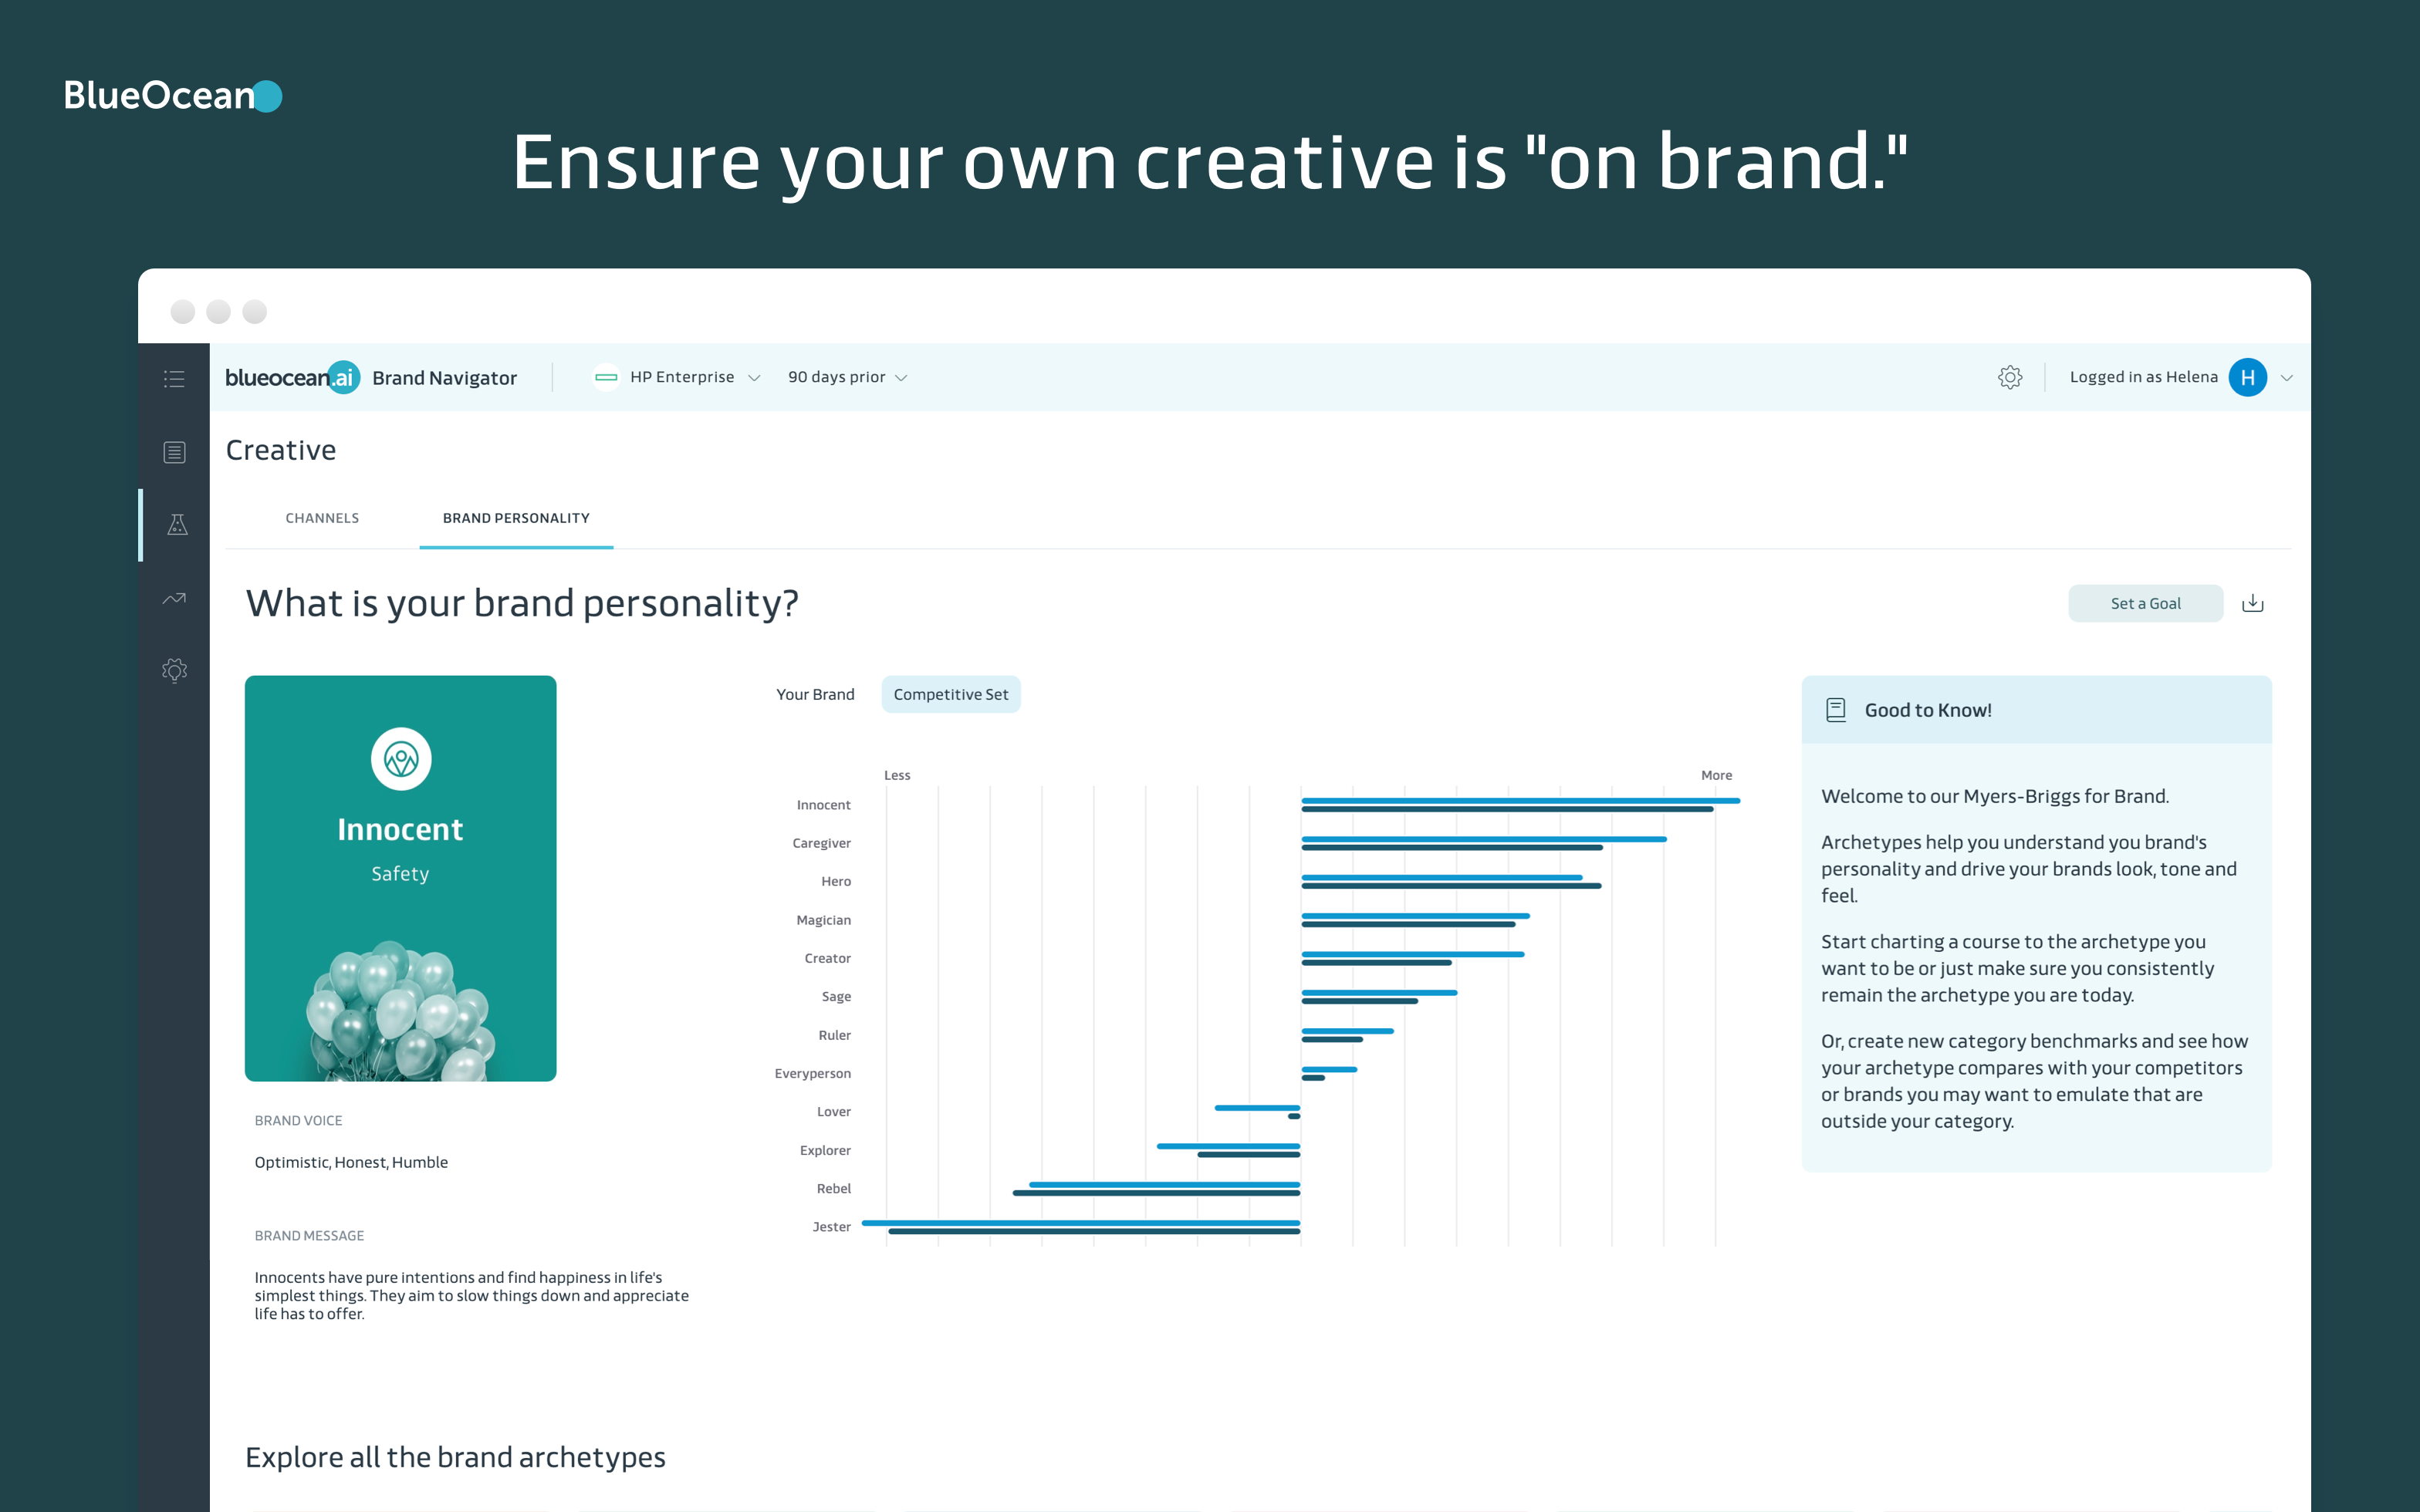 Ensure your own creative is 'on brand.'